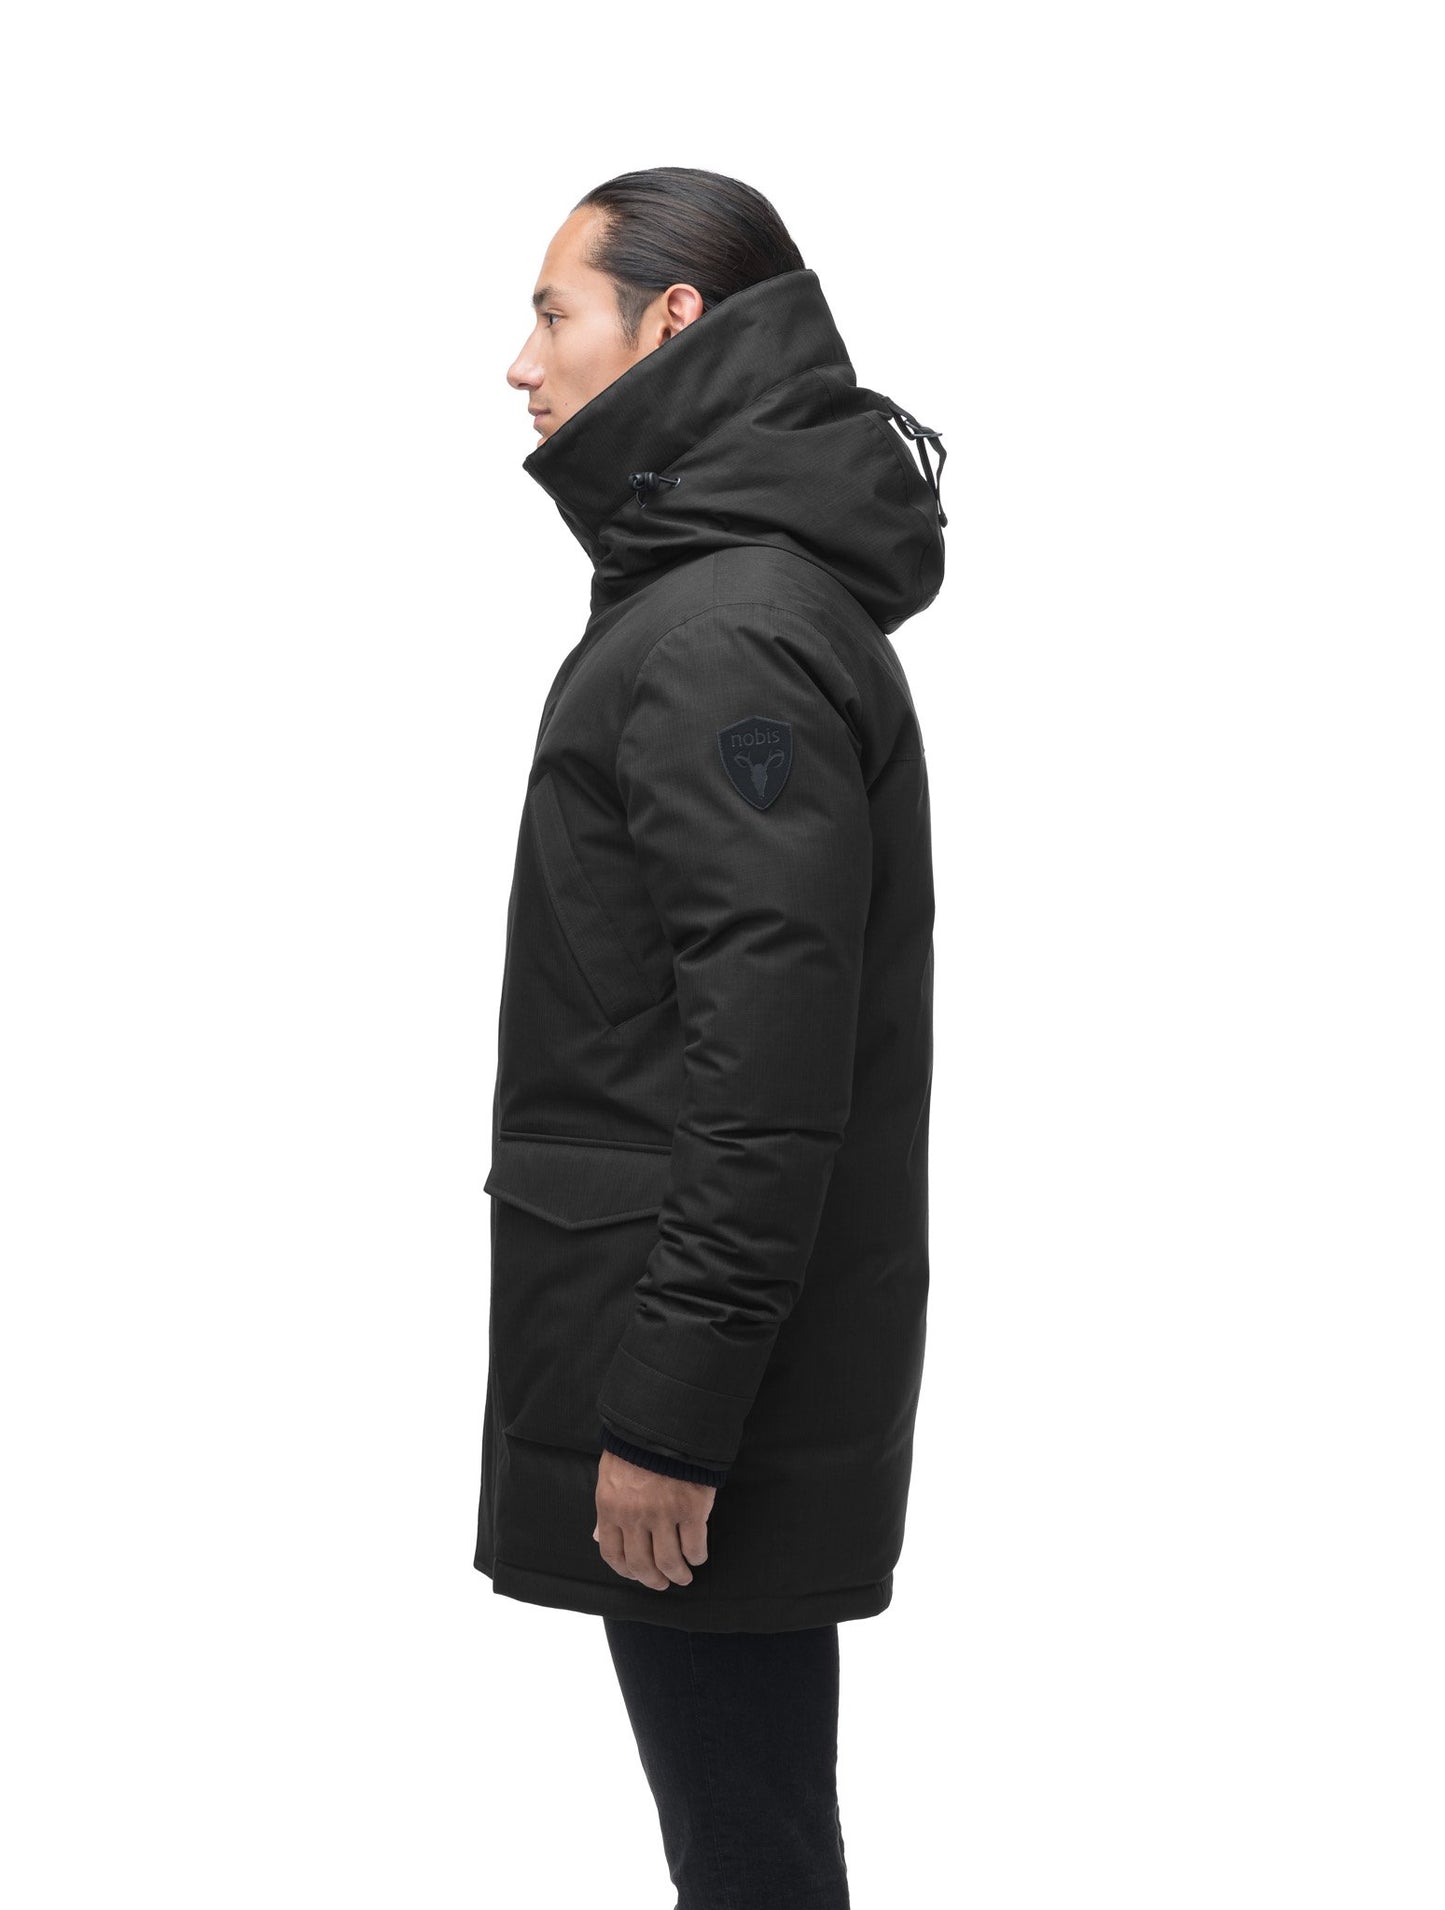 Men's thigh length down-filled parka with non-removable hood in Black